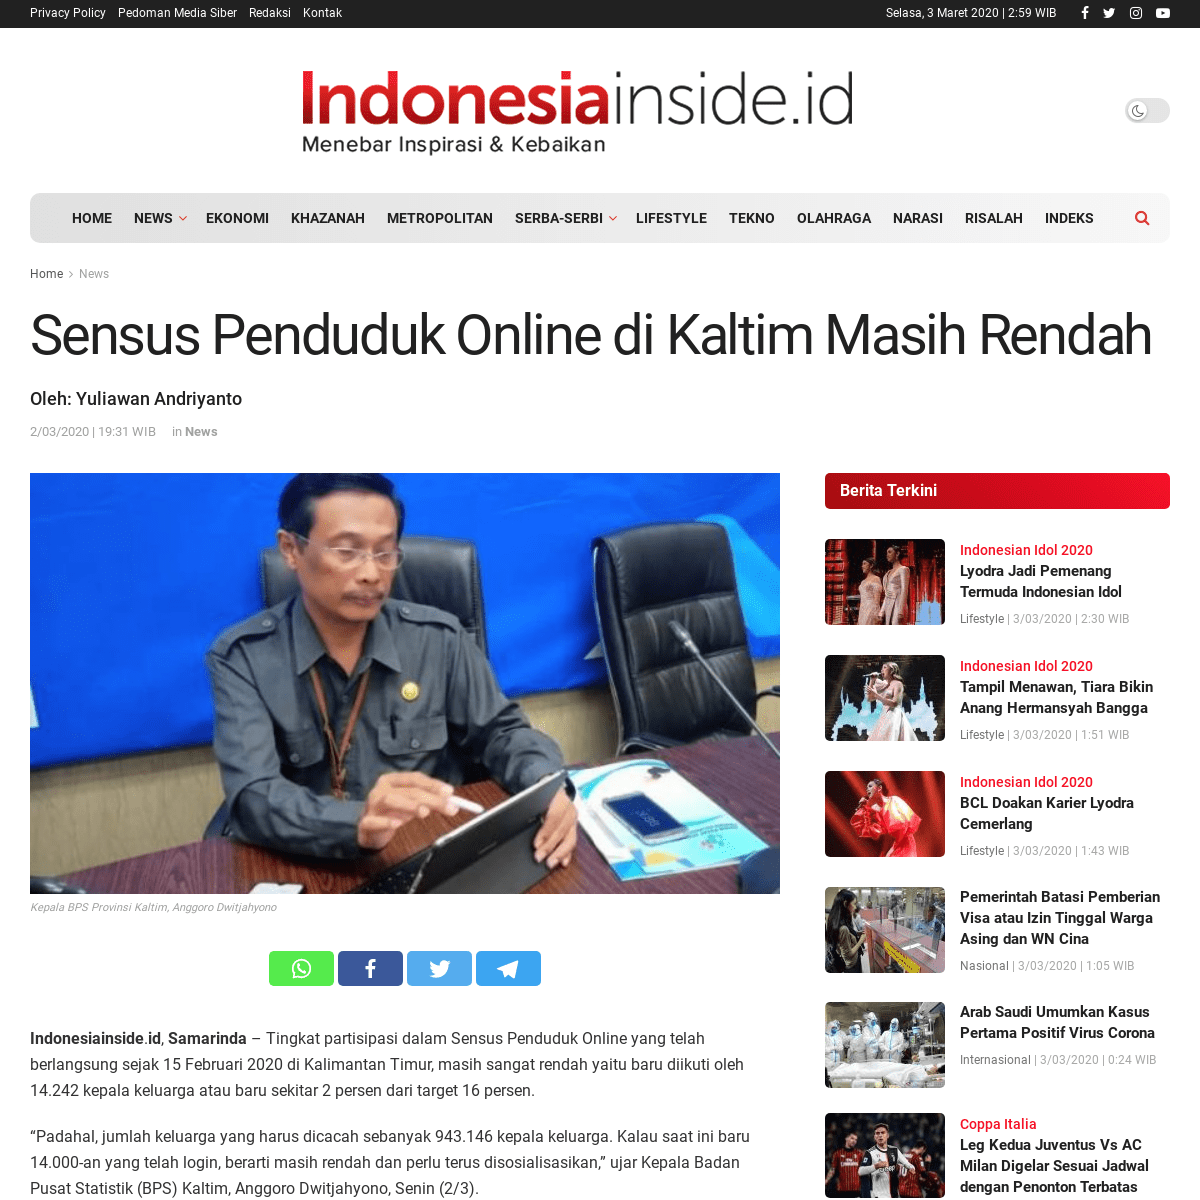 A complete backup of indonesiainside.id/news/2020/03/02/183181